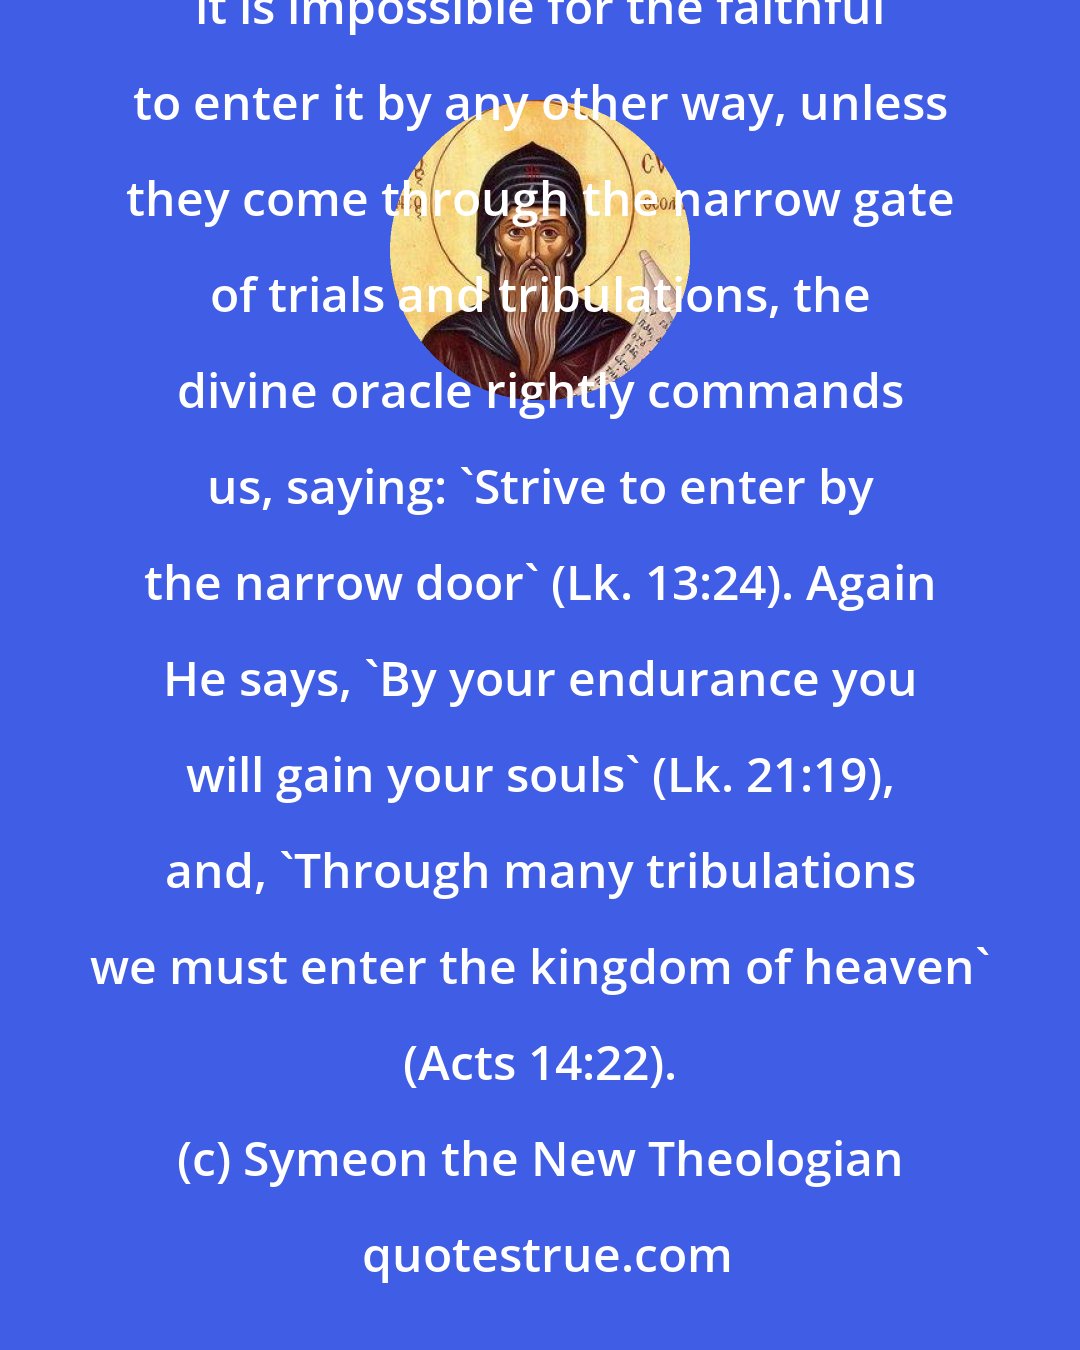 Symeon the New Theologian: Since ... 'the kingdom of heaven suffers violence and the violent take it by force' (Mt. 11:12), and it is impossible for the faithful to enter it by any other way, unless they come through the narrow gate of trials and tribulations, the divine oracle rightly commands us, saying: 'Strive to enter by the narrow door' (Lk. 13:24). Again He says, 'By your endurance you will gain your souls' (Lk. 21:19), and, 'Through many tribulations we must enter the kingdom of heaven' (Acts 14:22).